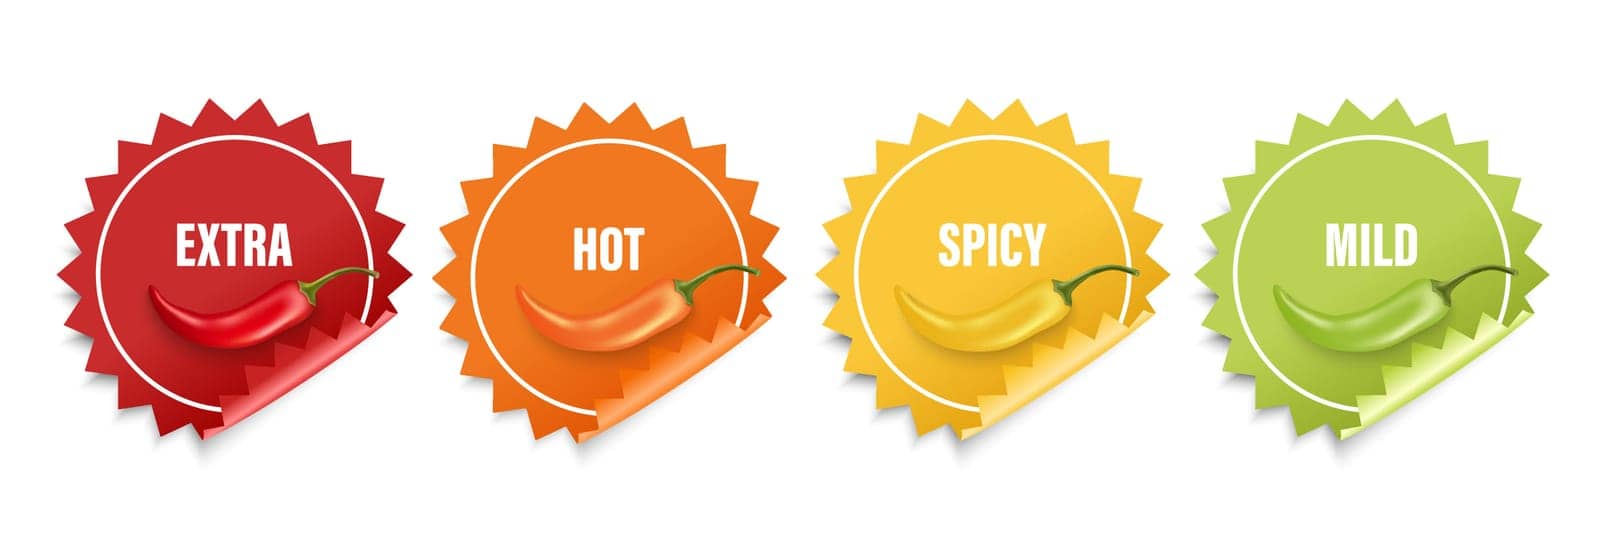 Realistic Vector Round Stickers with Spicy Chili Pepper Levels. Red, Orange, Yellow, Green Jalapeno Pepper Strength Scale Sticker Indicators with Mild, Spicy, Hot and Extra Positions by Gomolach